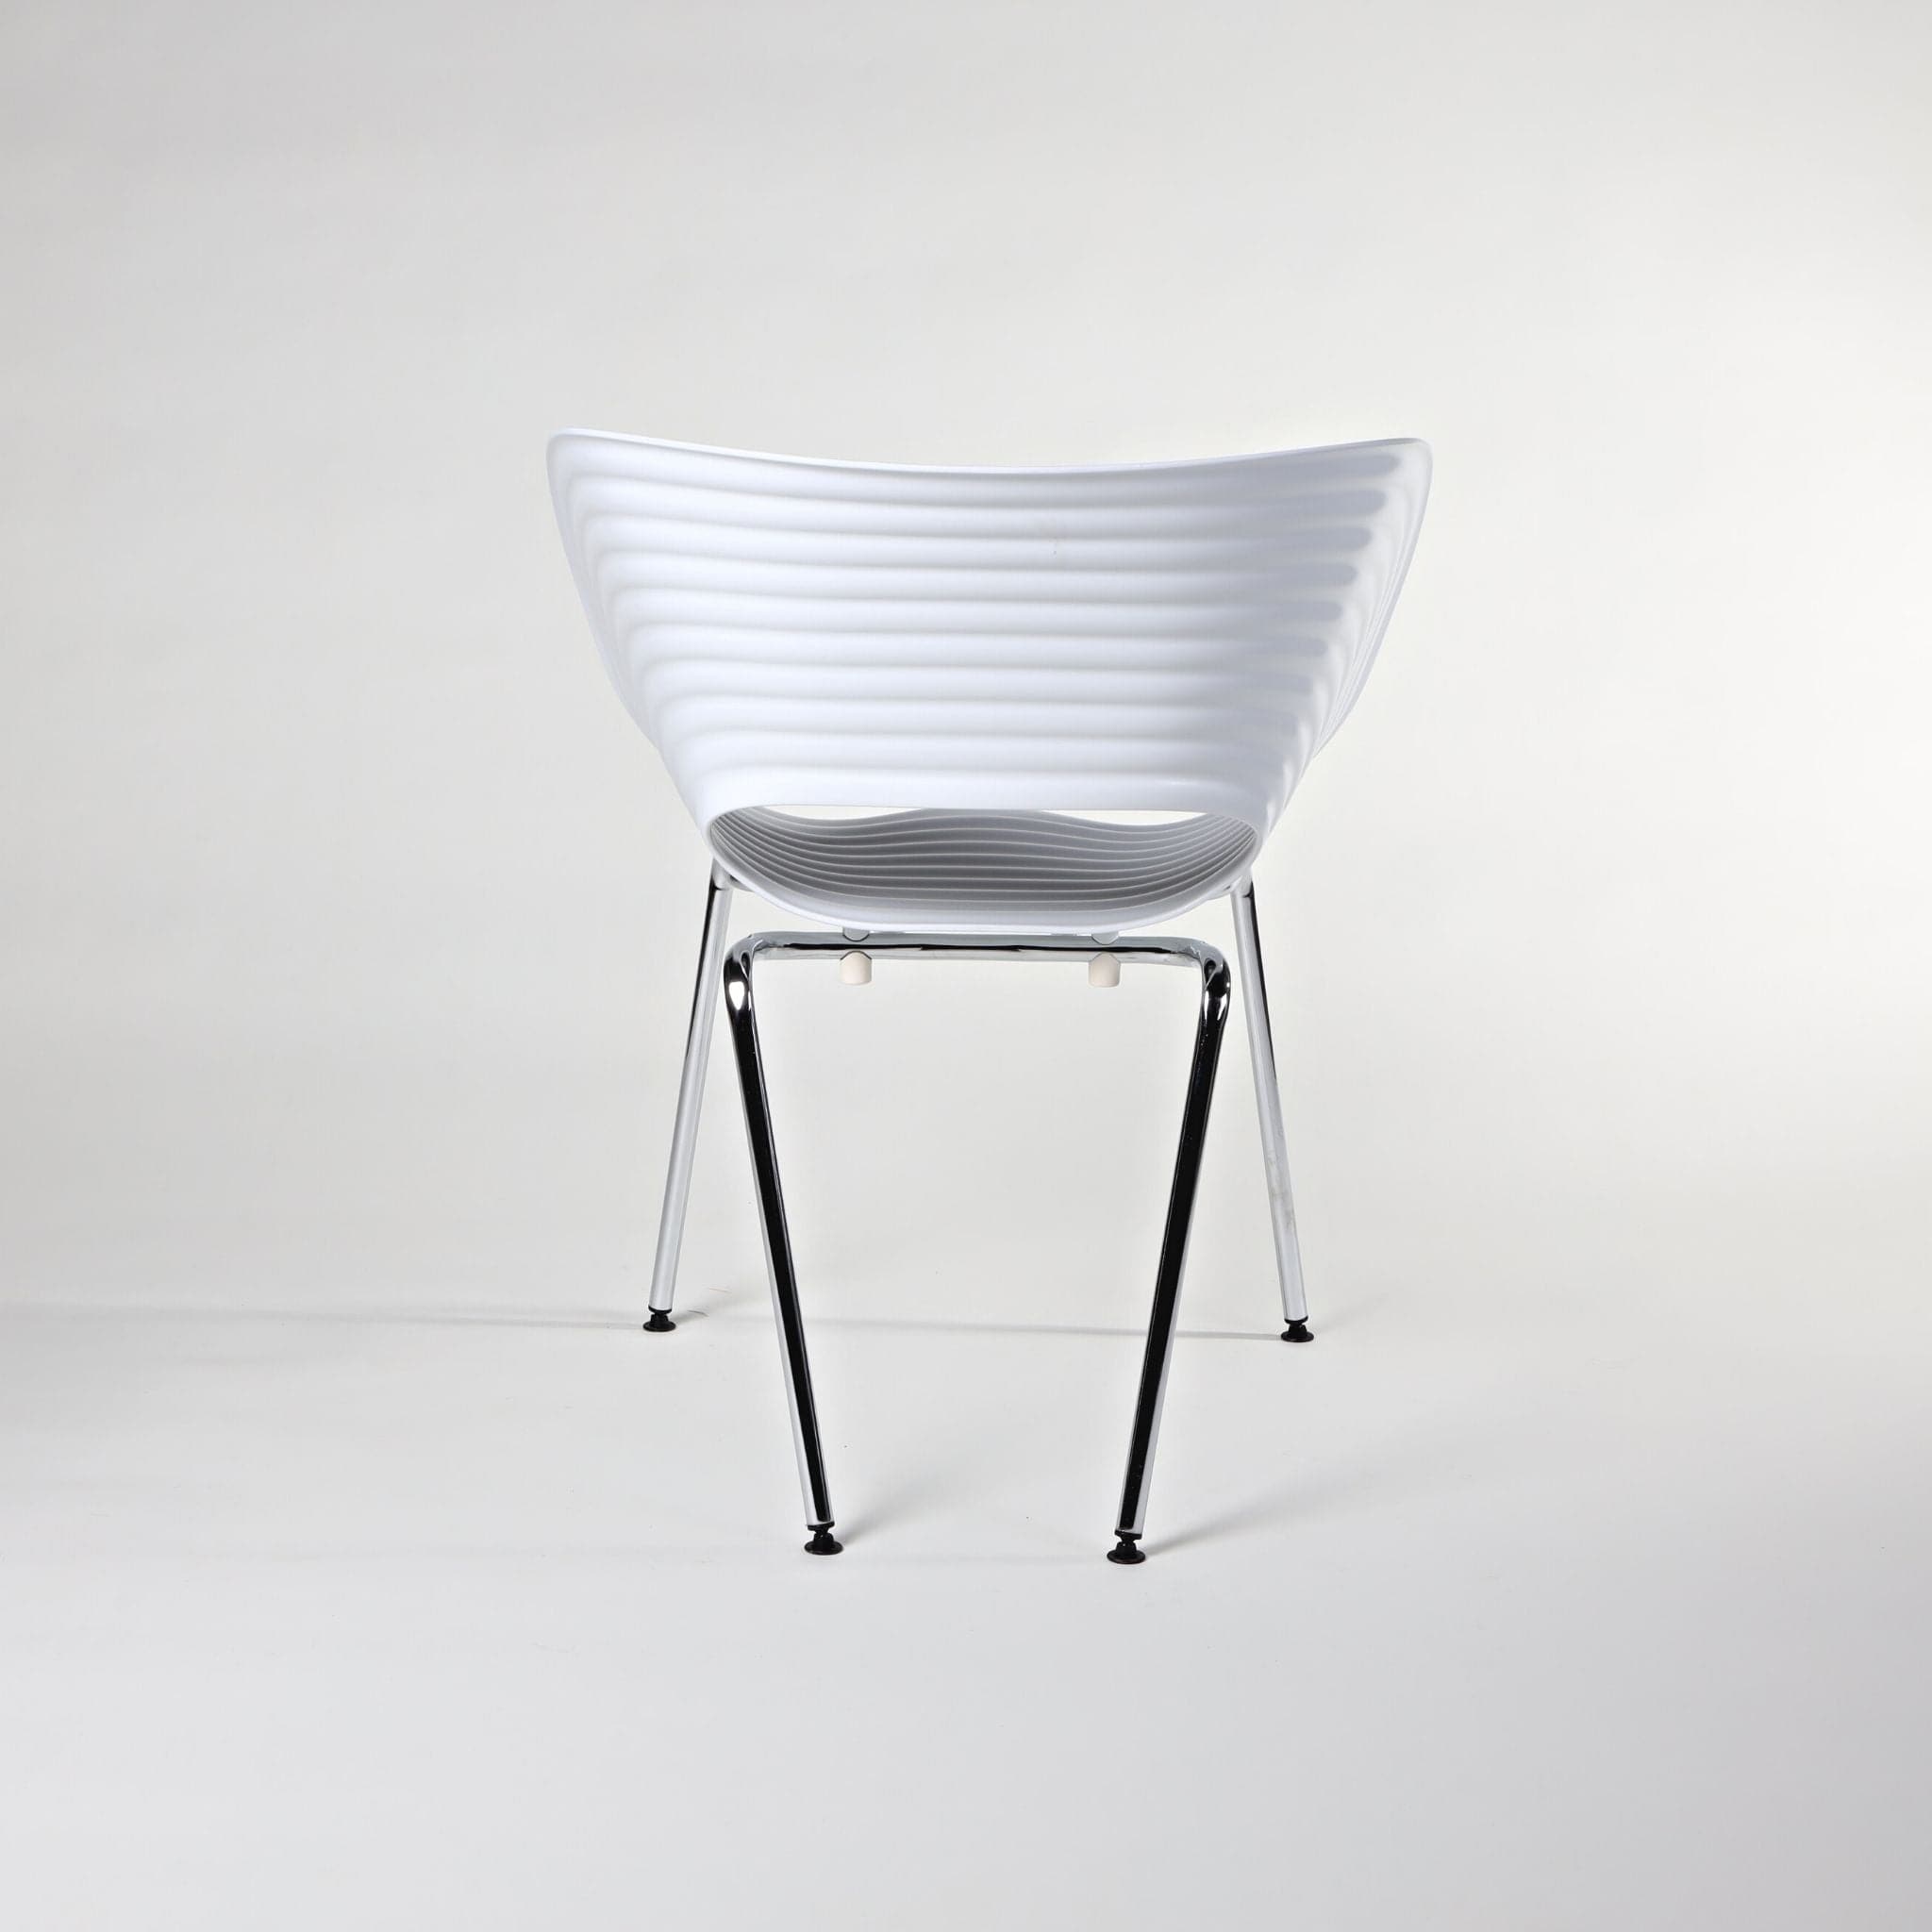 Shell Dining Chair